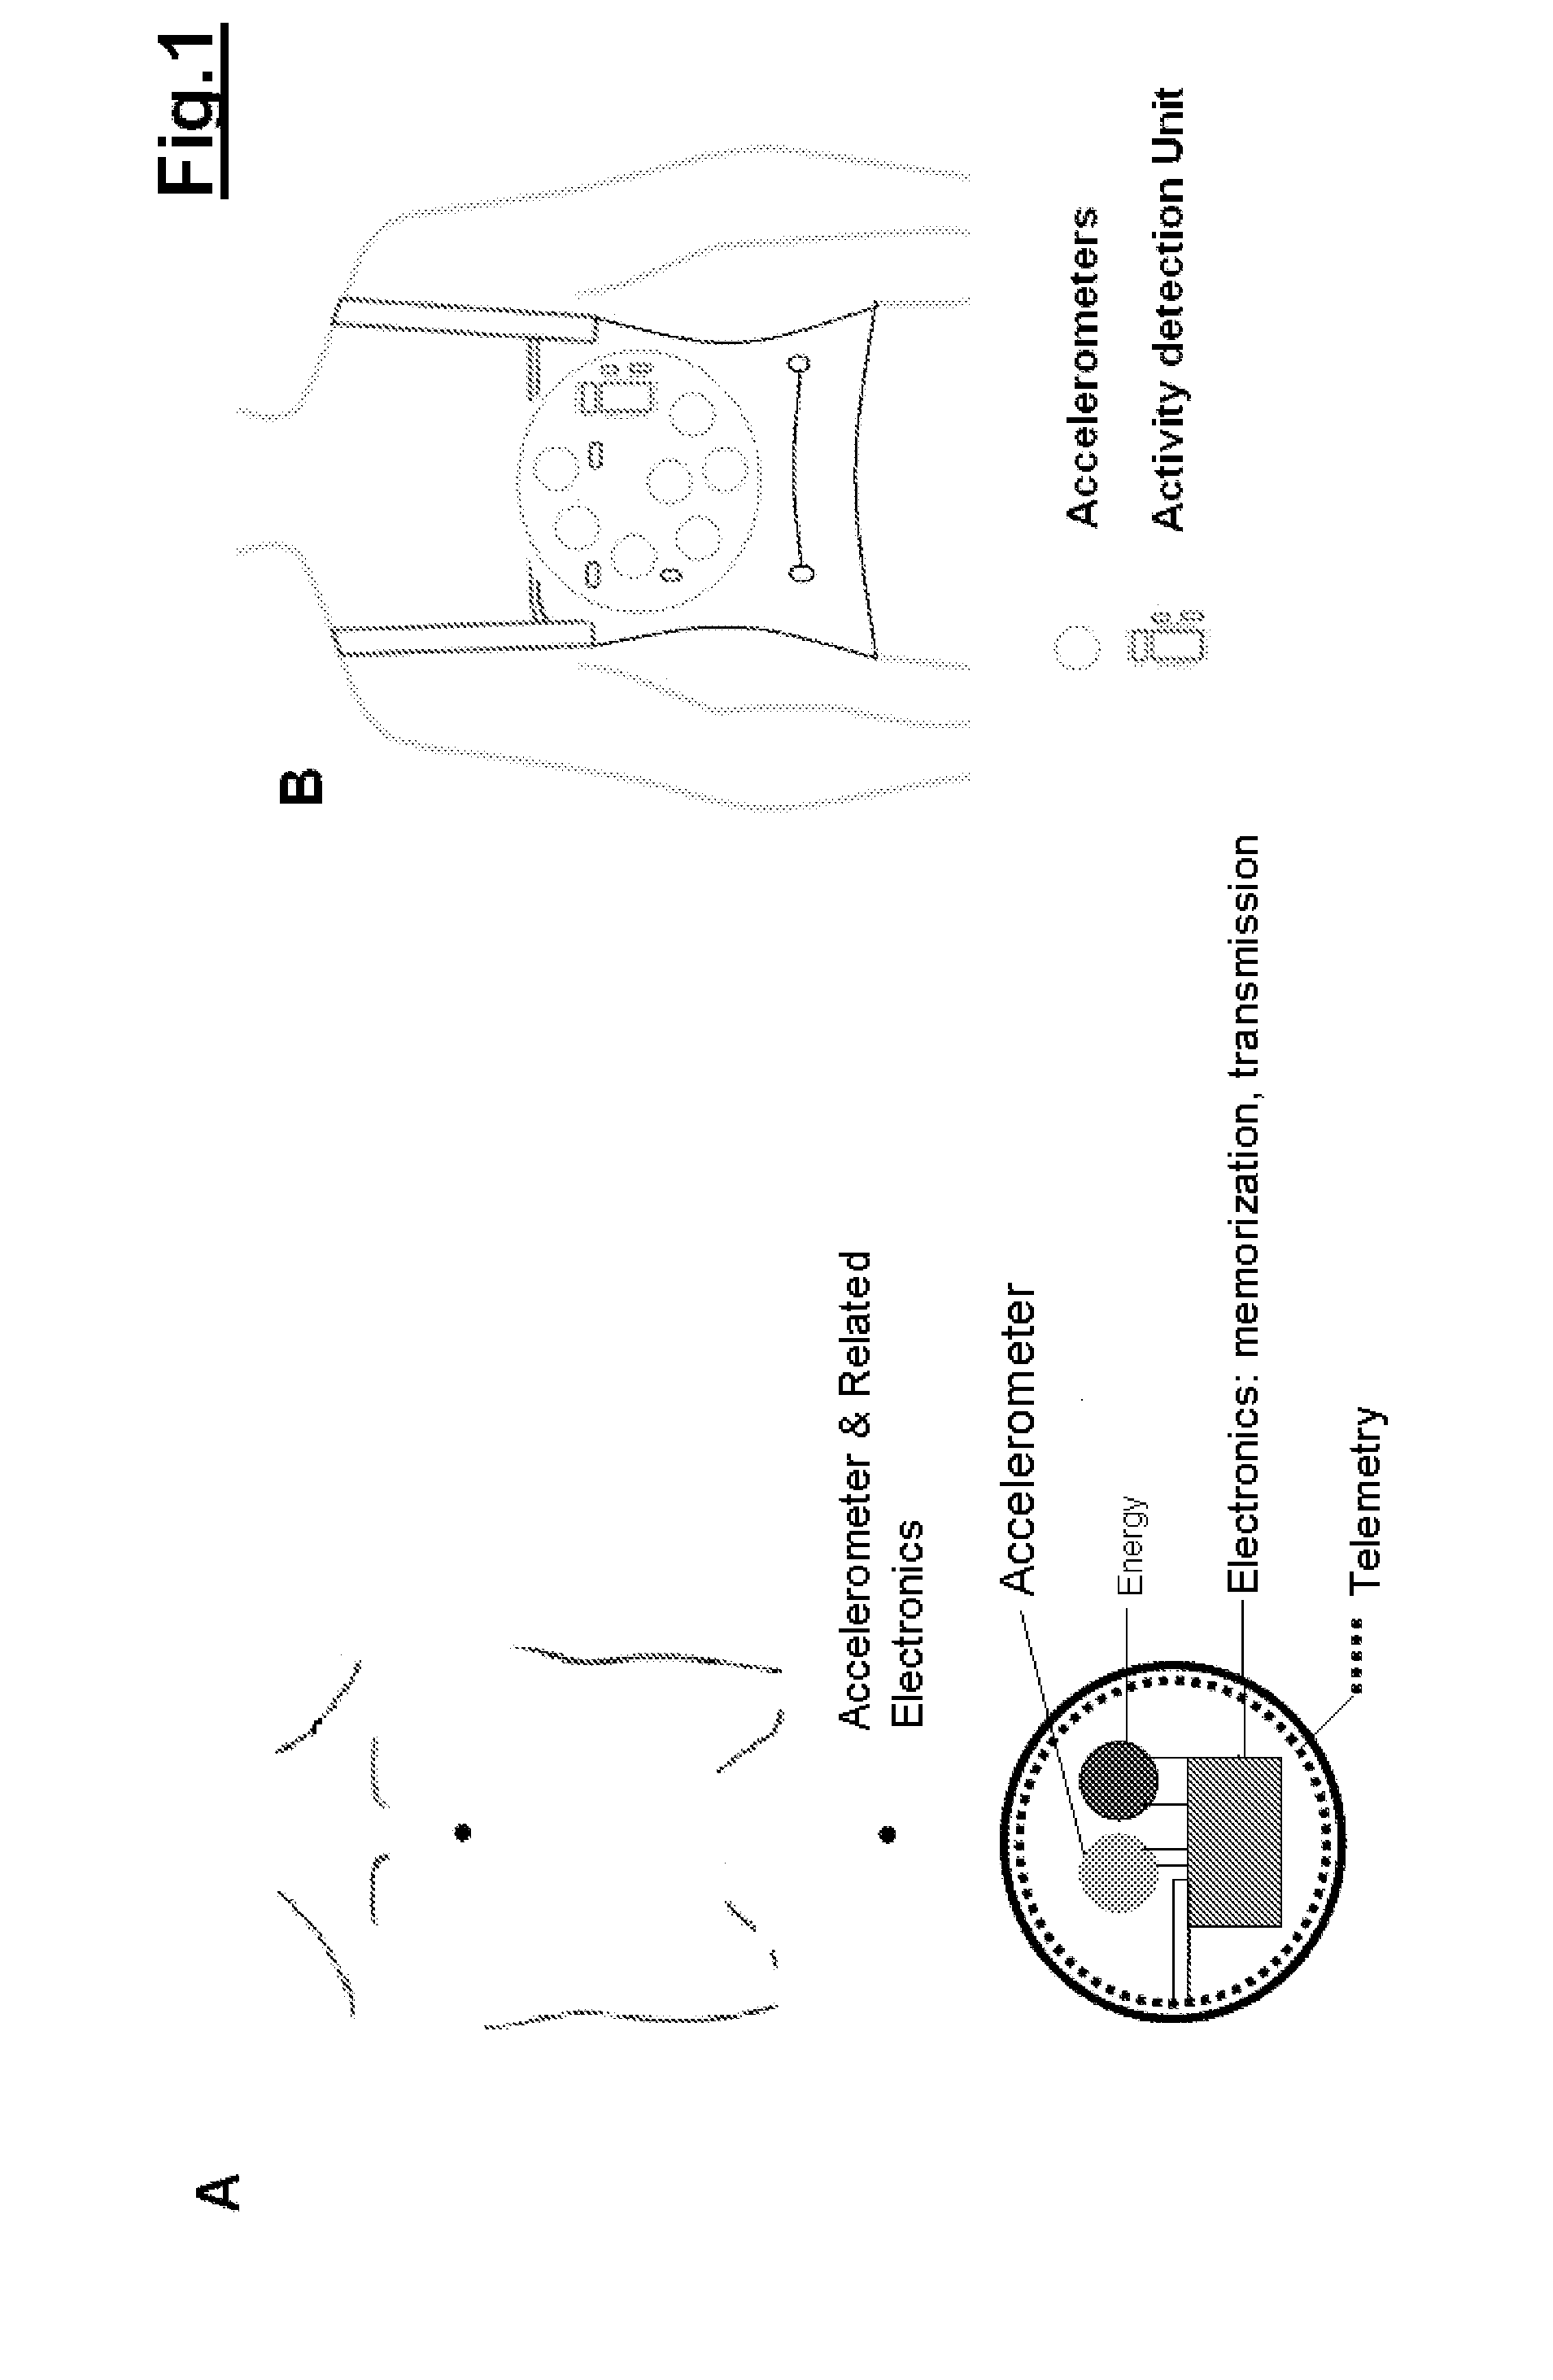 Device for quantification and monitoring of cardiovascular function during induced stress or physical activity and at rest